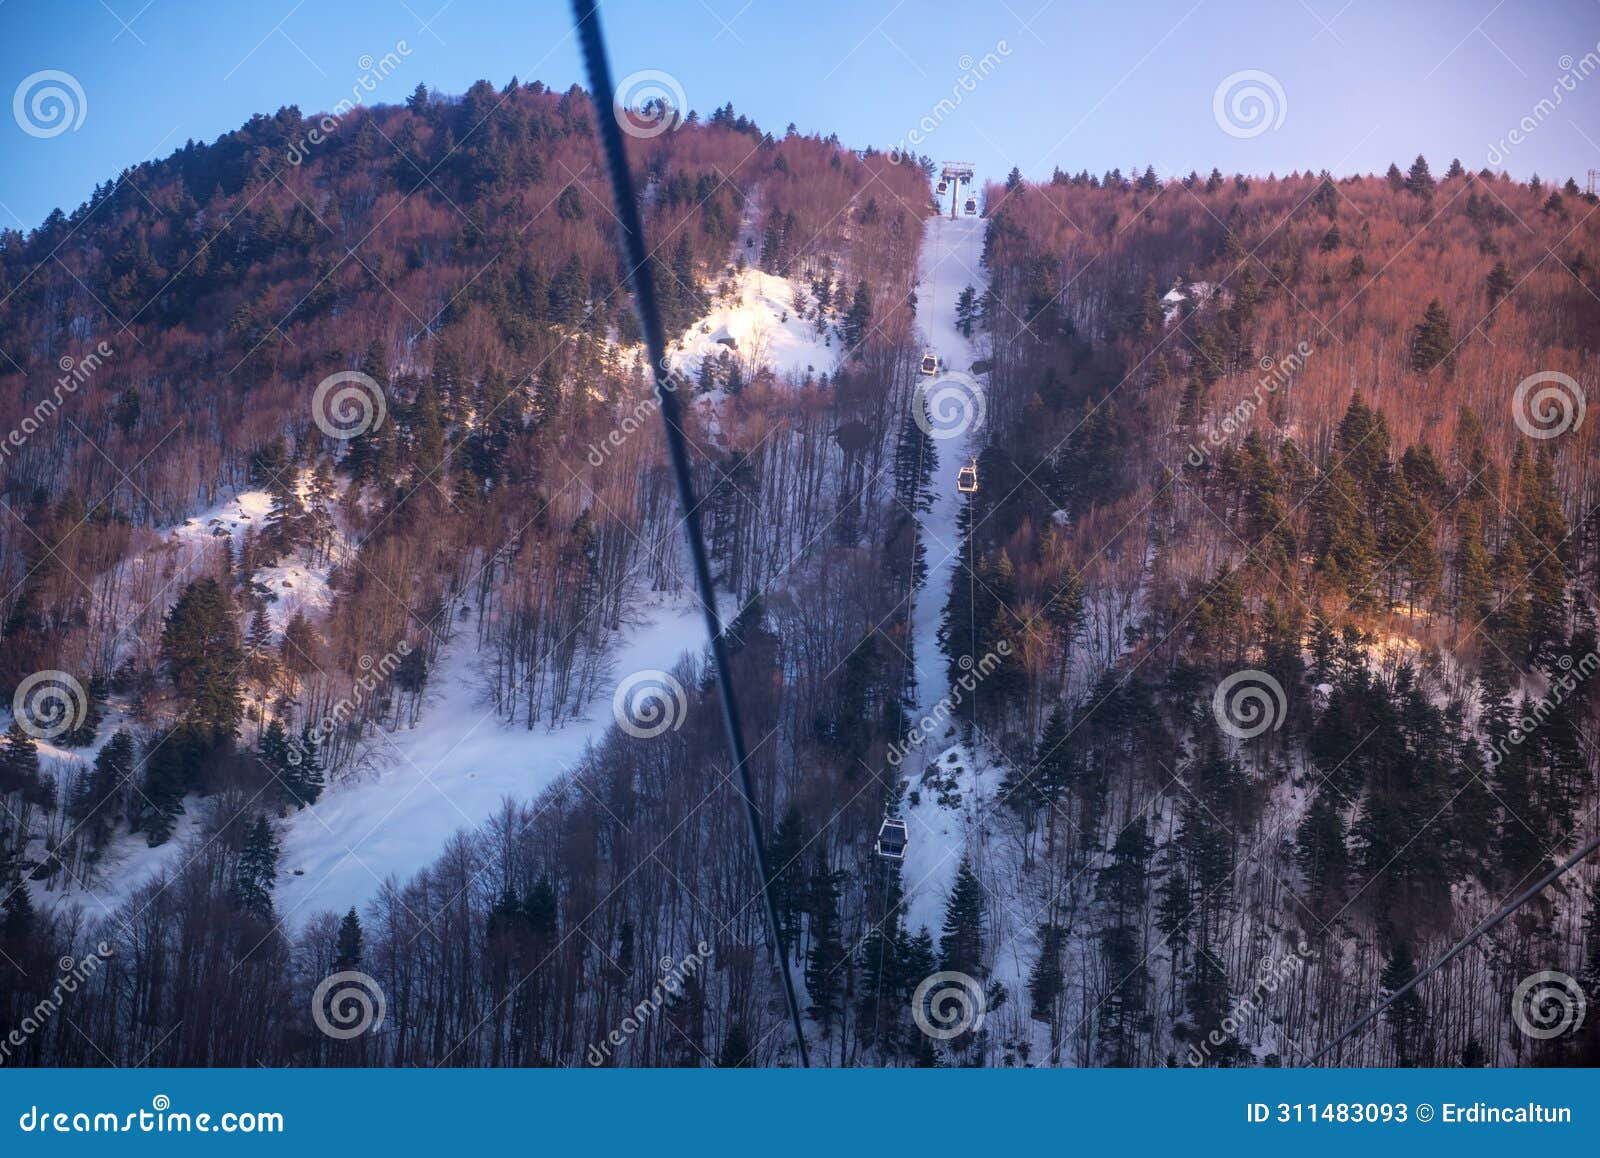 the cable cars at the uludag winter tourism center